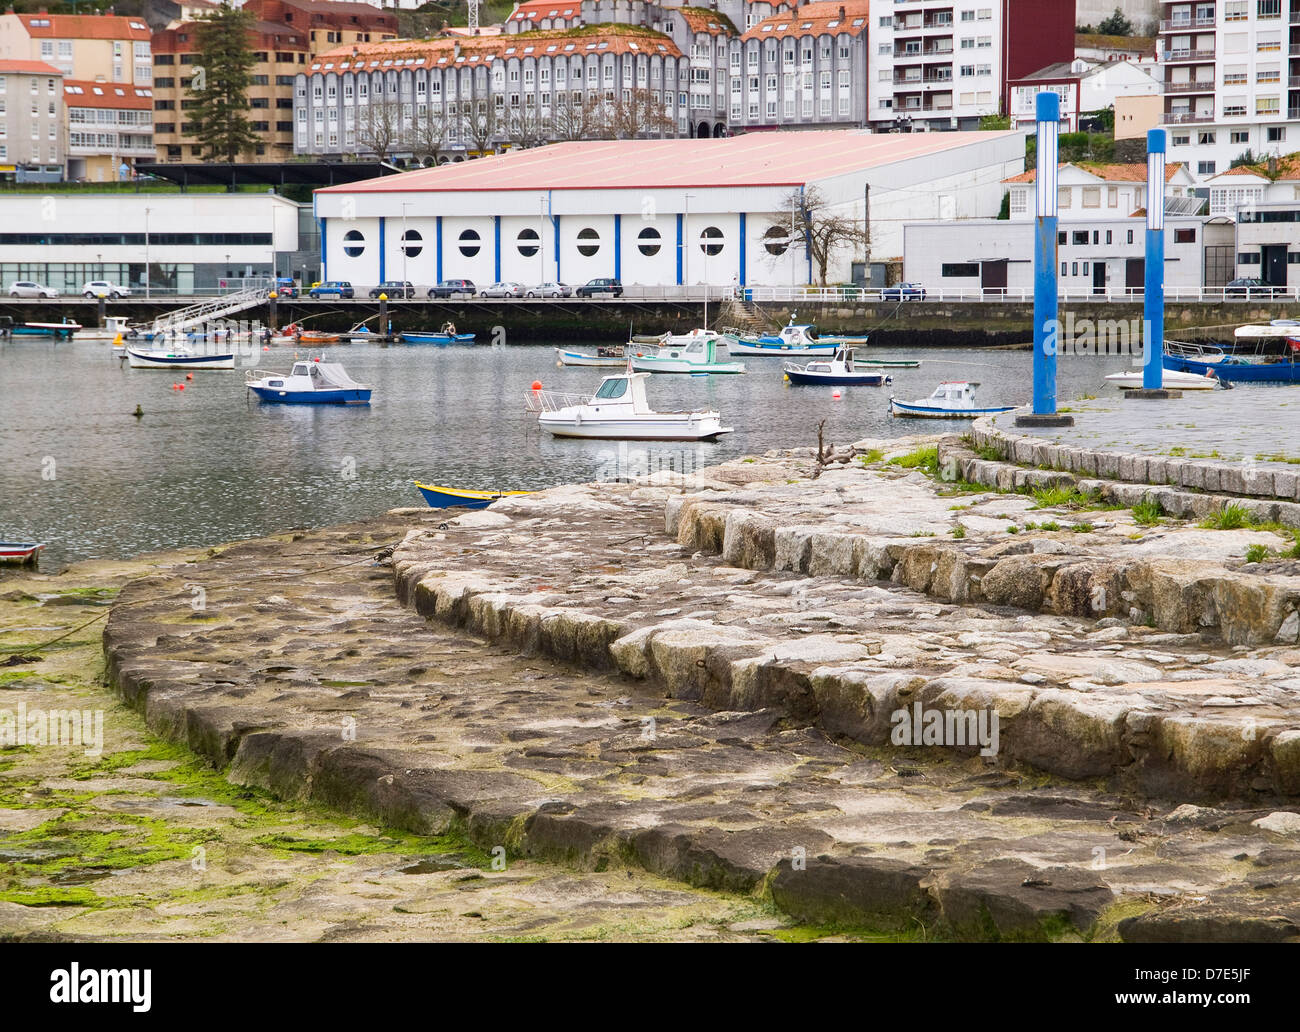 Pontedeume pier in Galicia, Spain. Pontedeume is a little village in the northwest of Spain. Stock Photo